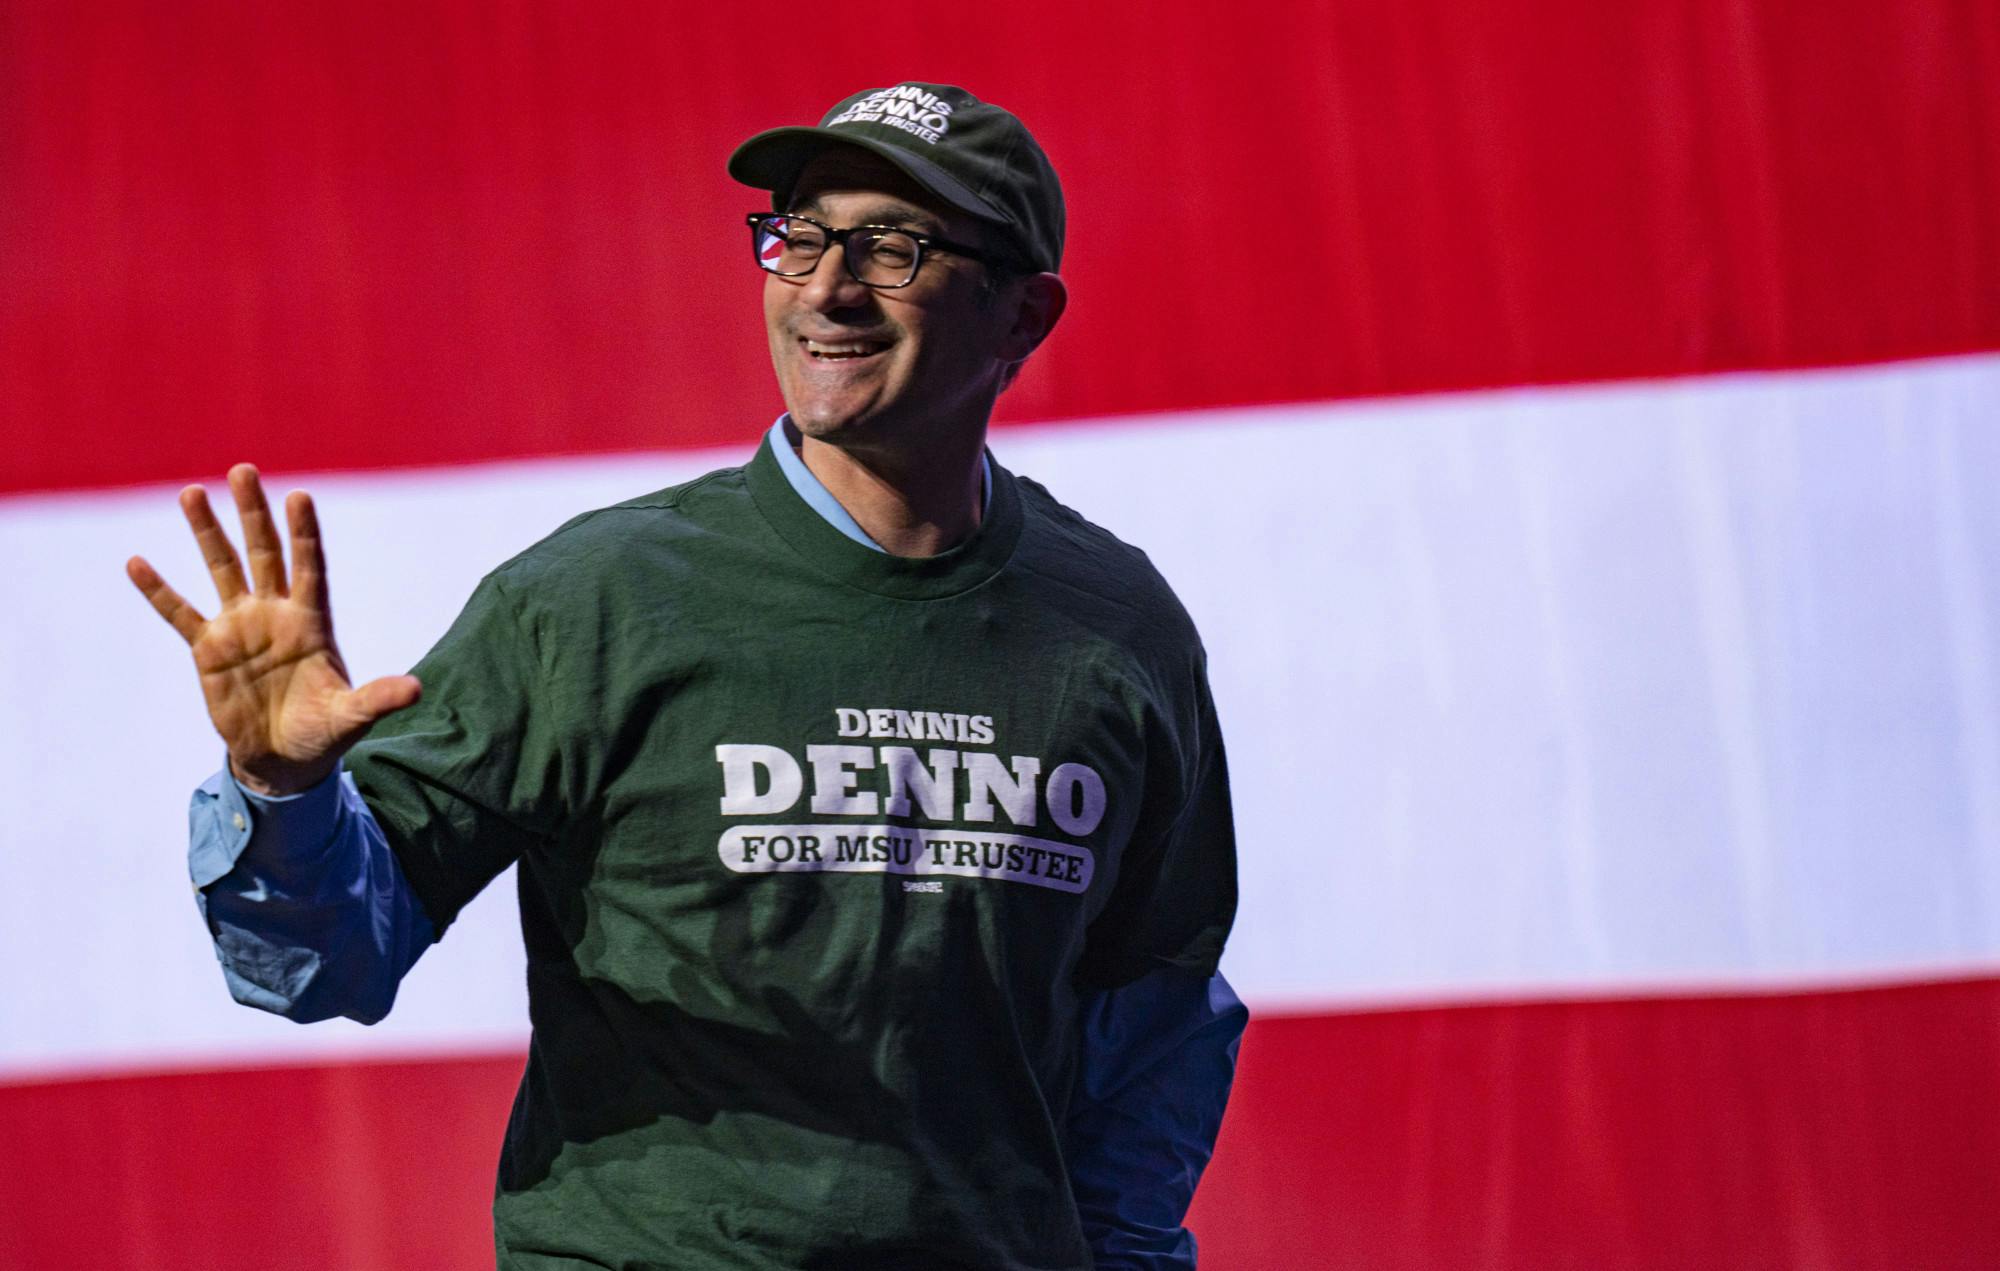 <p>Michigan State University Board of Trustees candidate Dennis Denno at the 2022 State Endorsement Convention for the Michigan Democratic Party at the TCF Convention Center. - April 9, 2022</p>